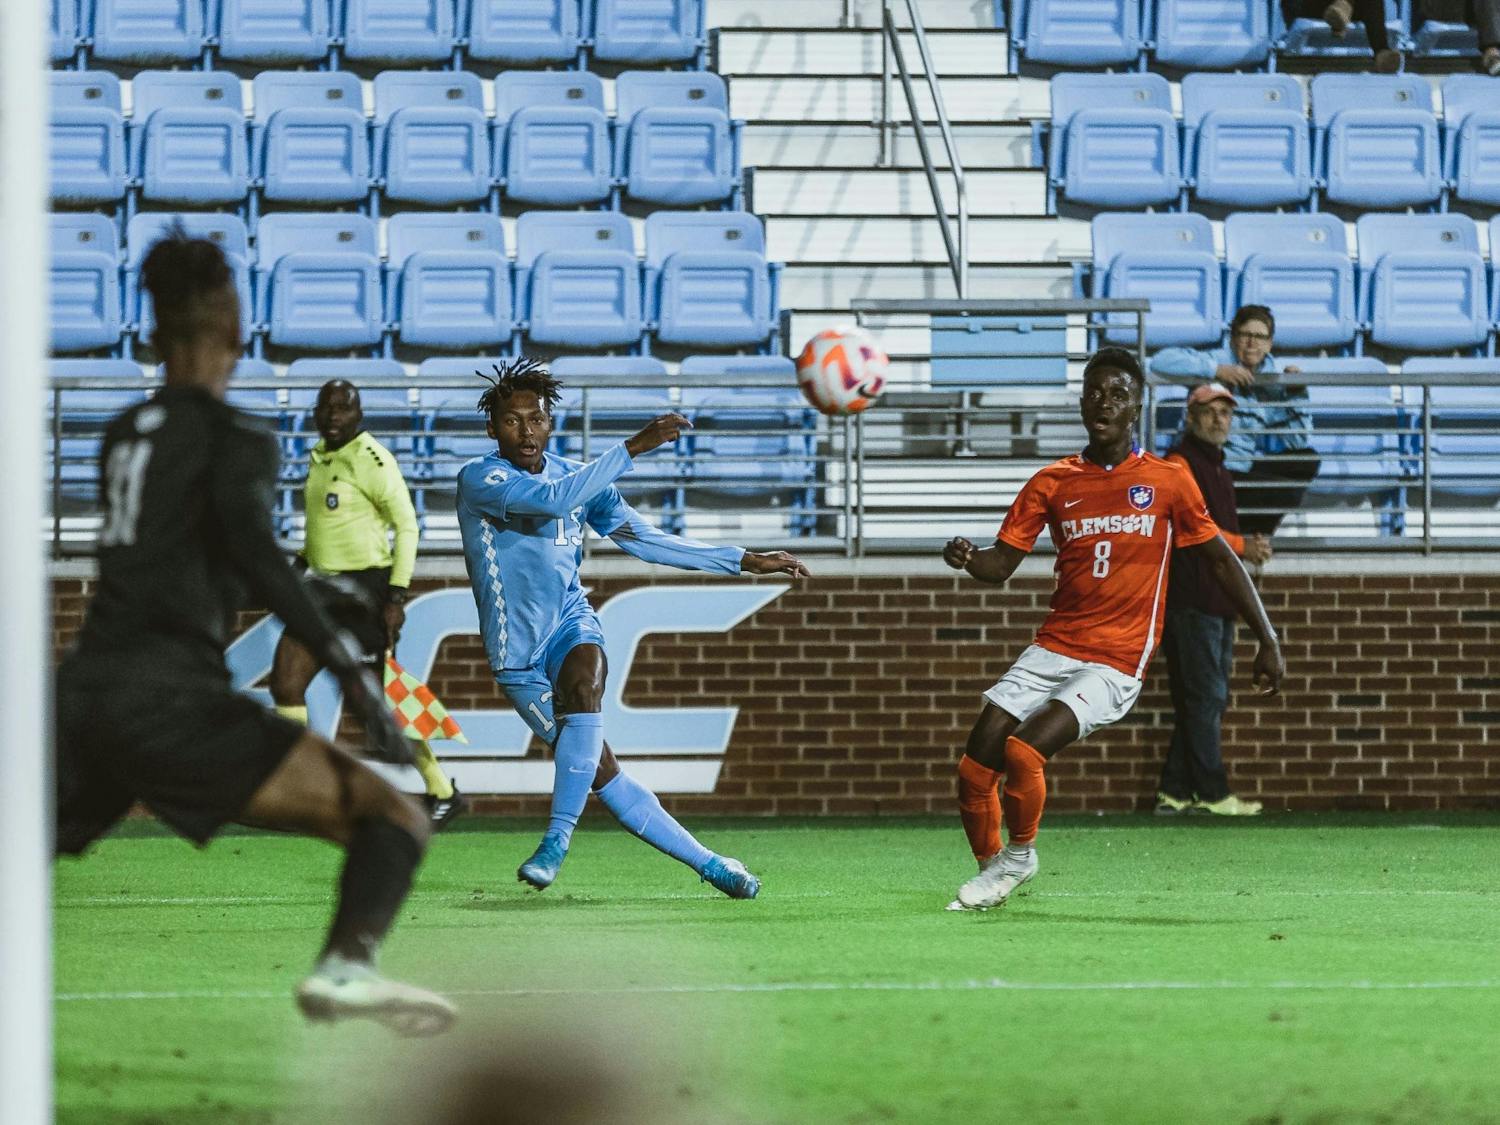 UNC freshman Key White (13) attempts to score in first half of the men's soccer match against Clemson on Monday, Oct. 3, 2022, at Dorrance Field. UNC and Clemson are tied at half.